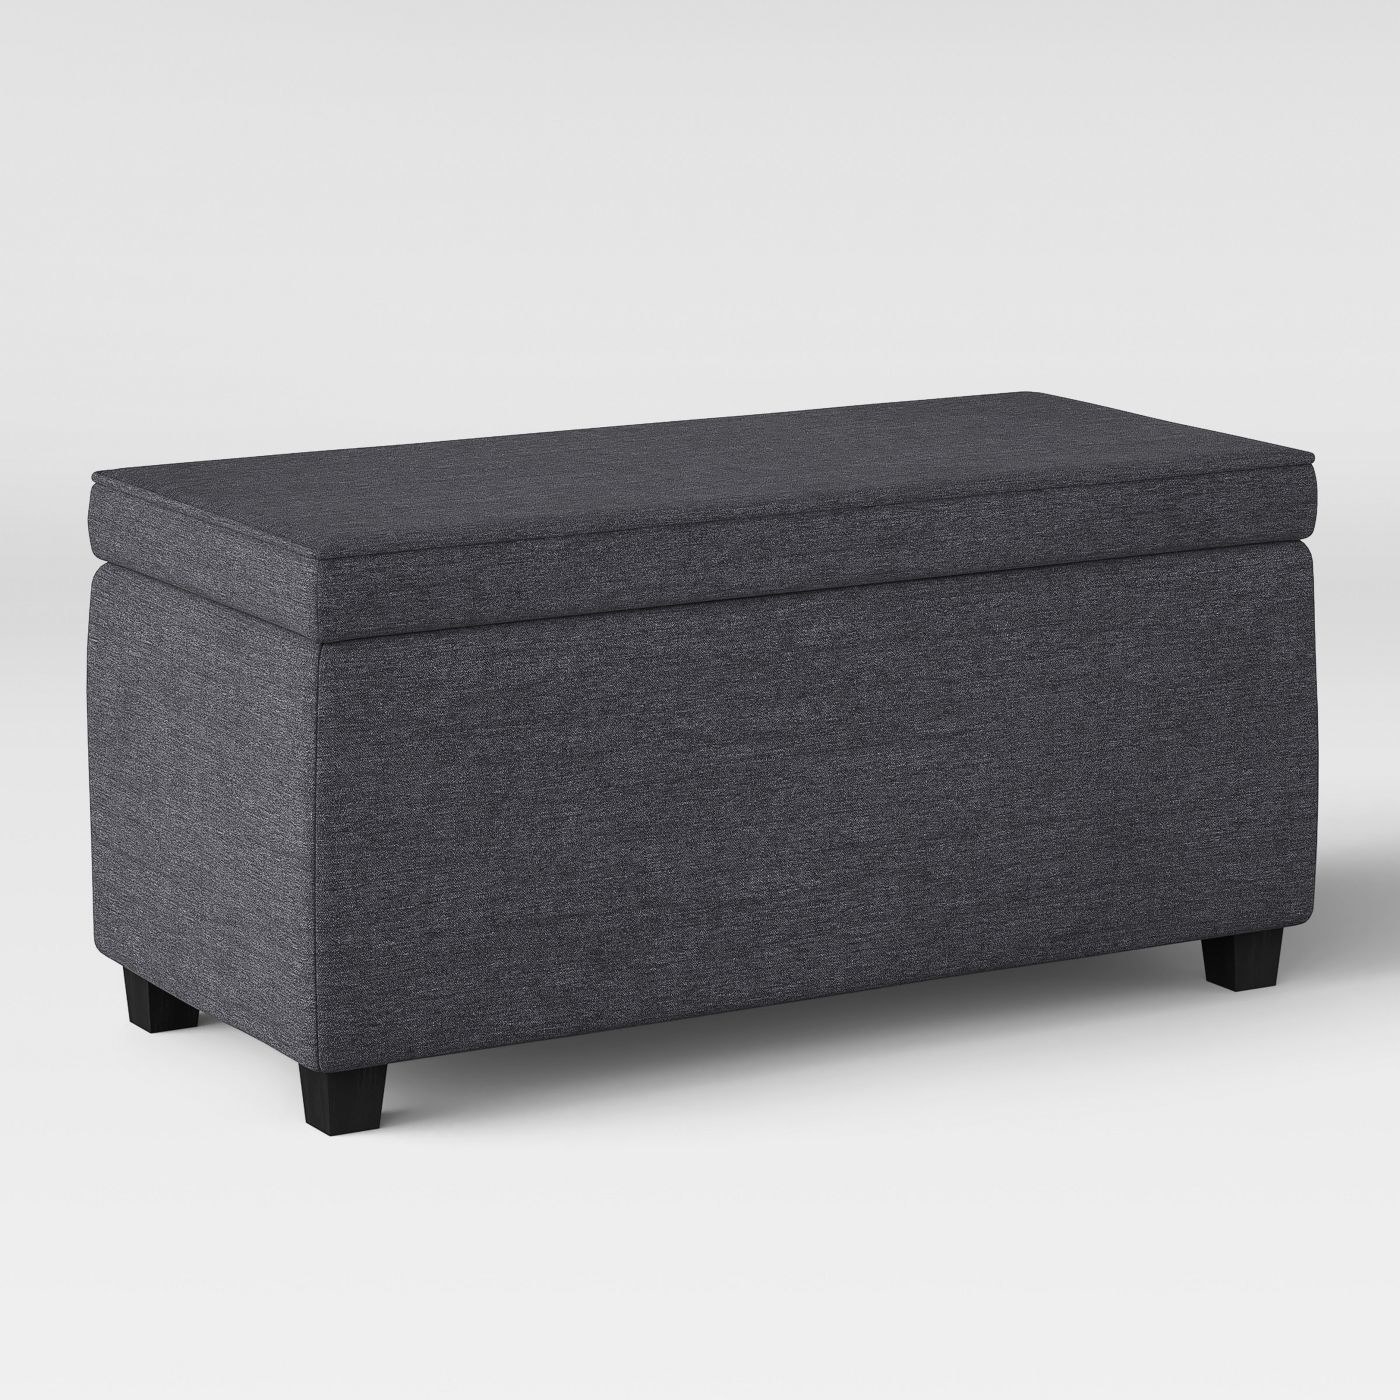 Gray ottoman with removable lid for storage